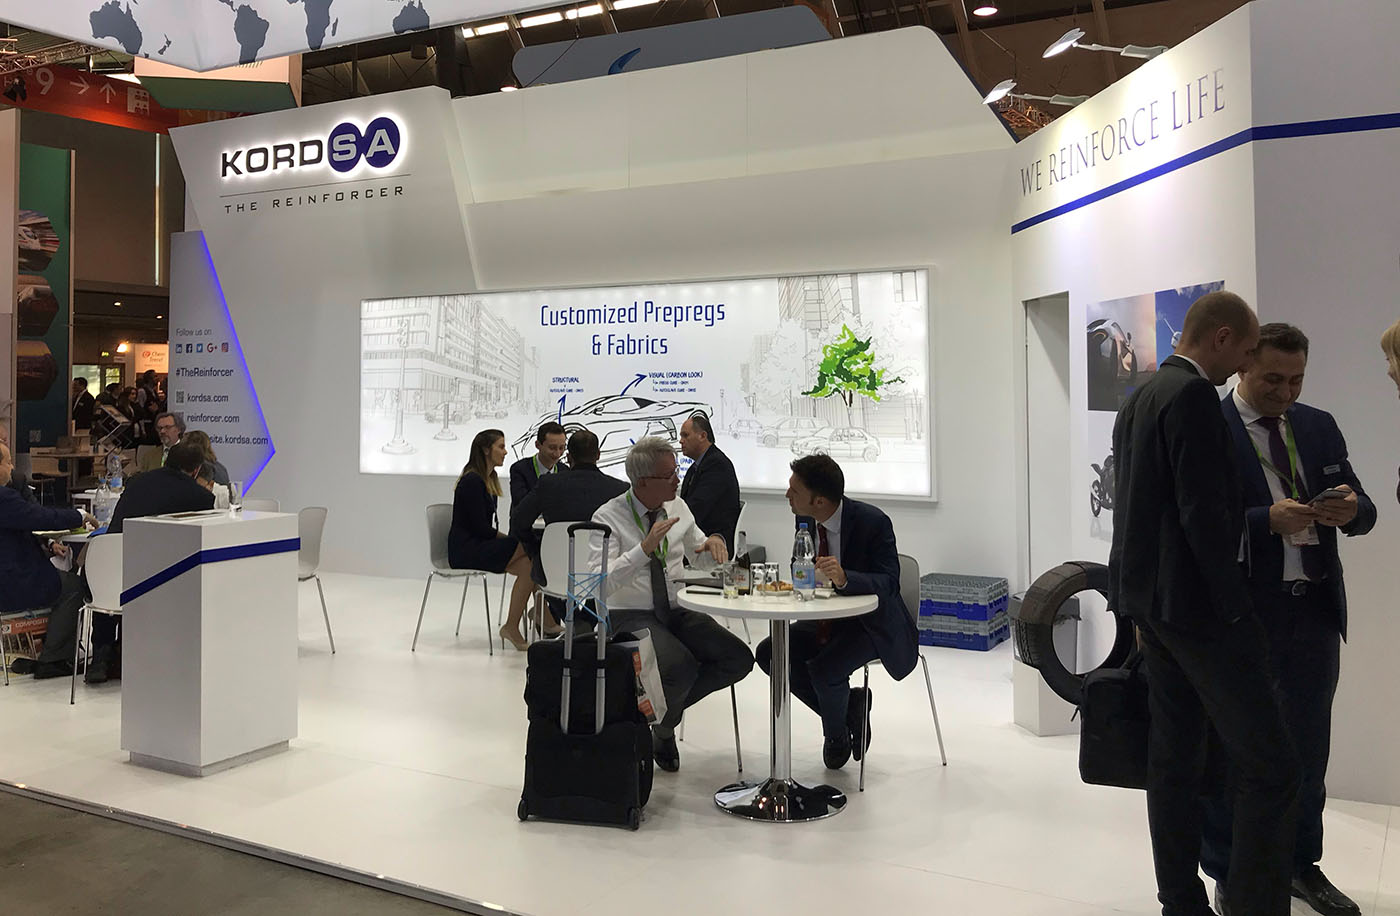 Kordsa at Composites Europe with its composites technologies